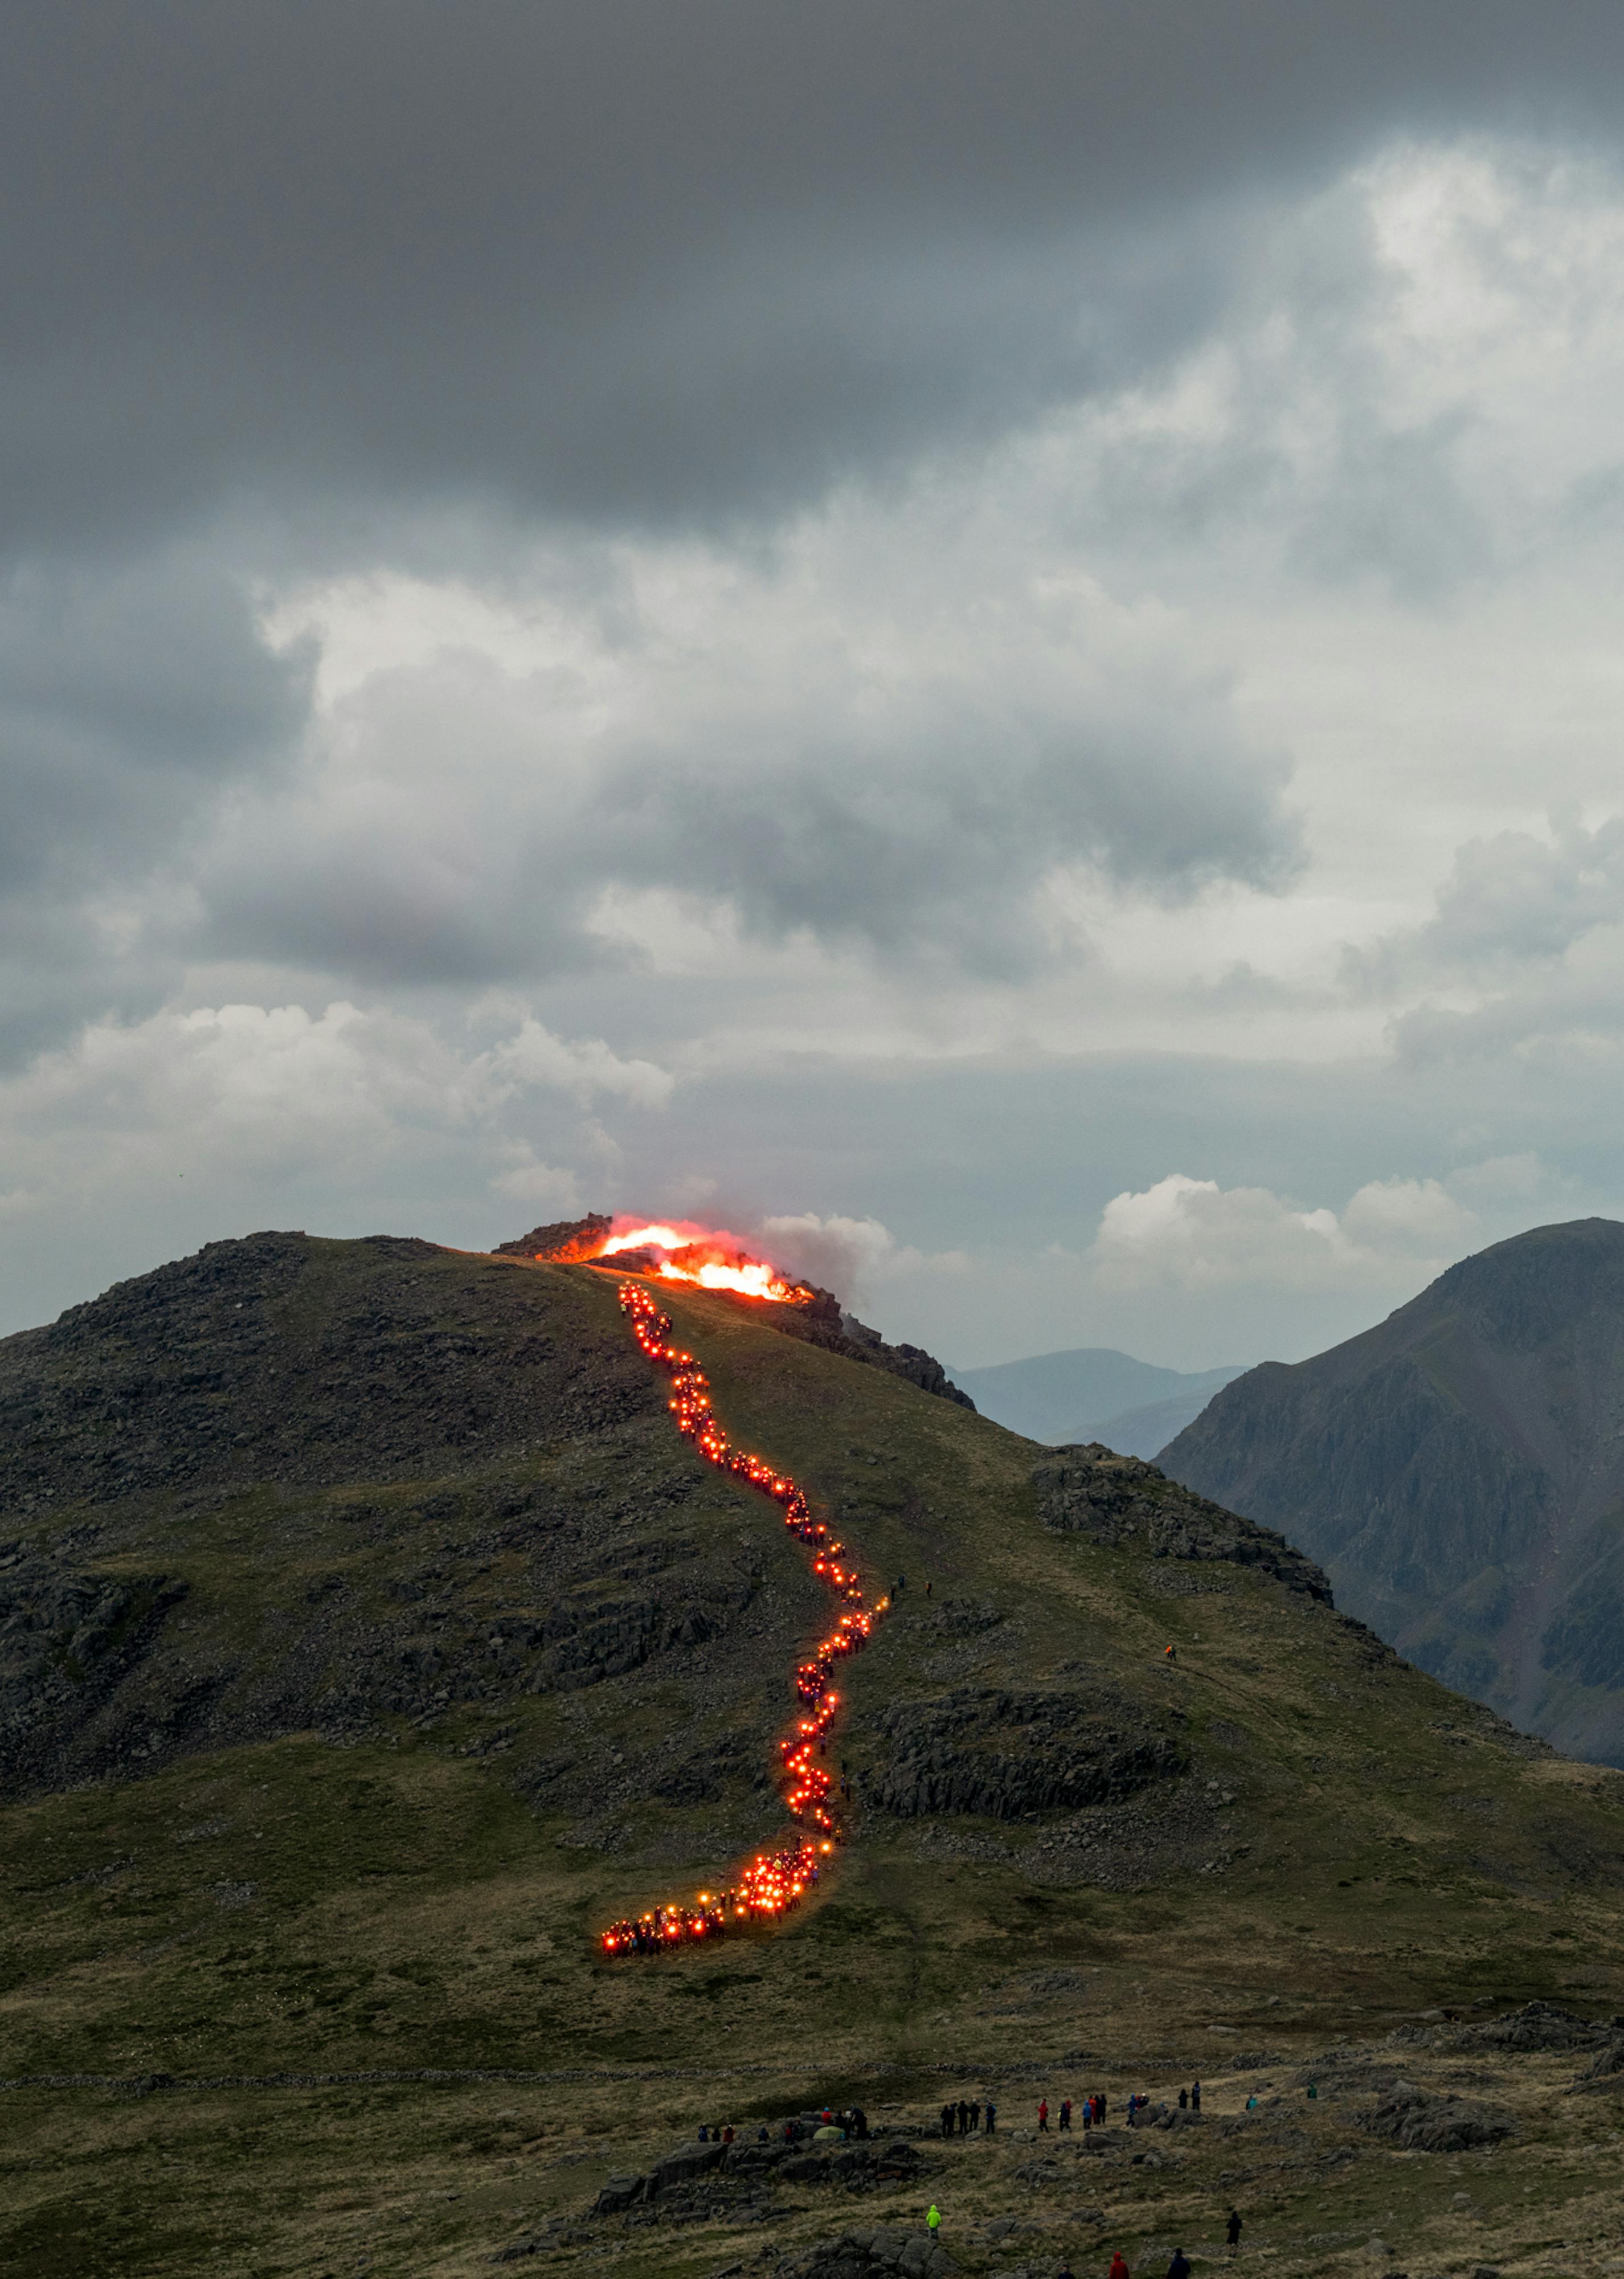 A foggy mountain top with a trail of red lights snaking down to simulate lava flow